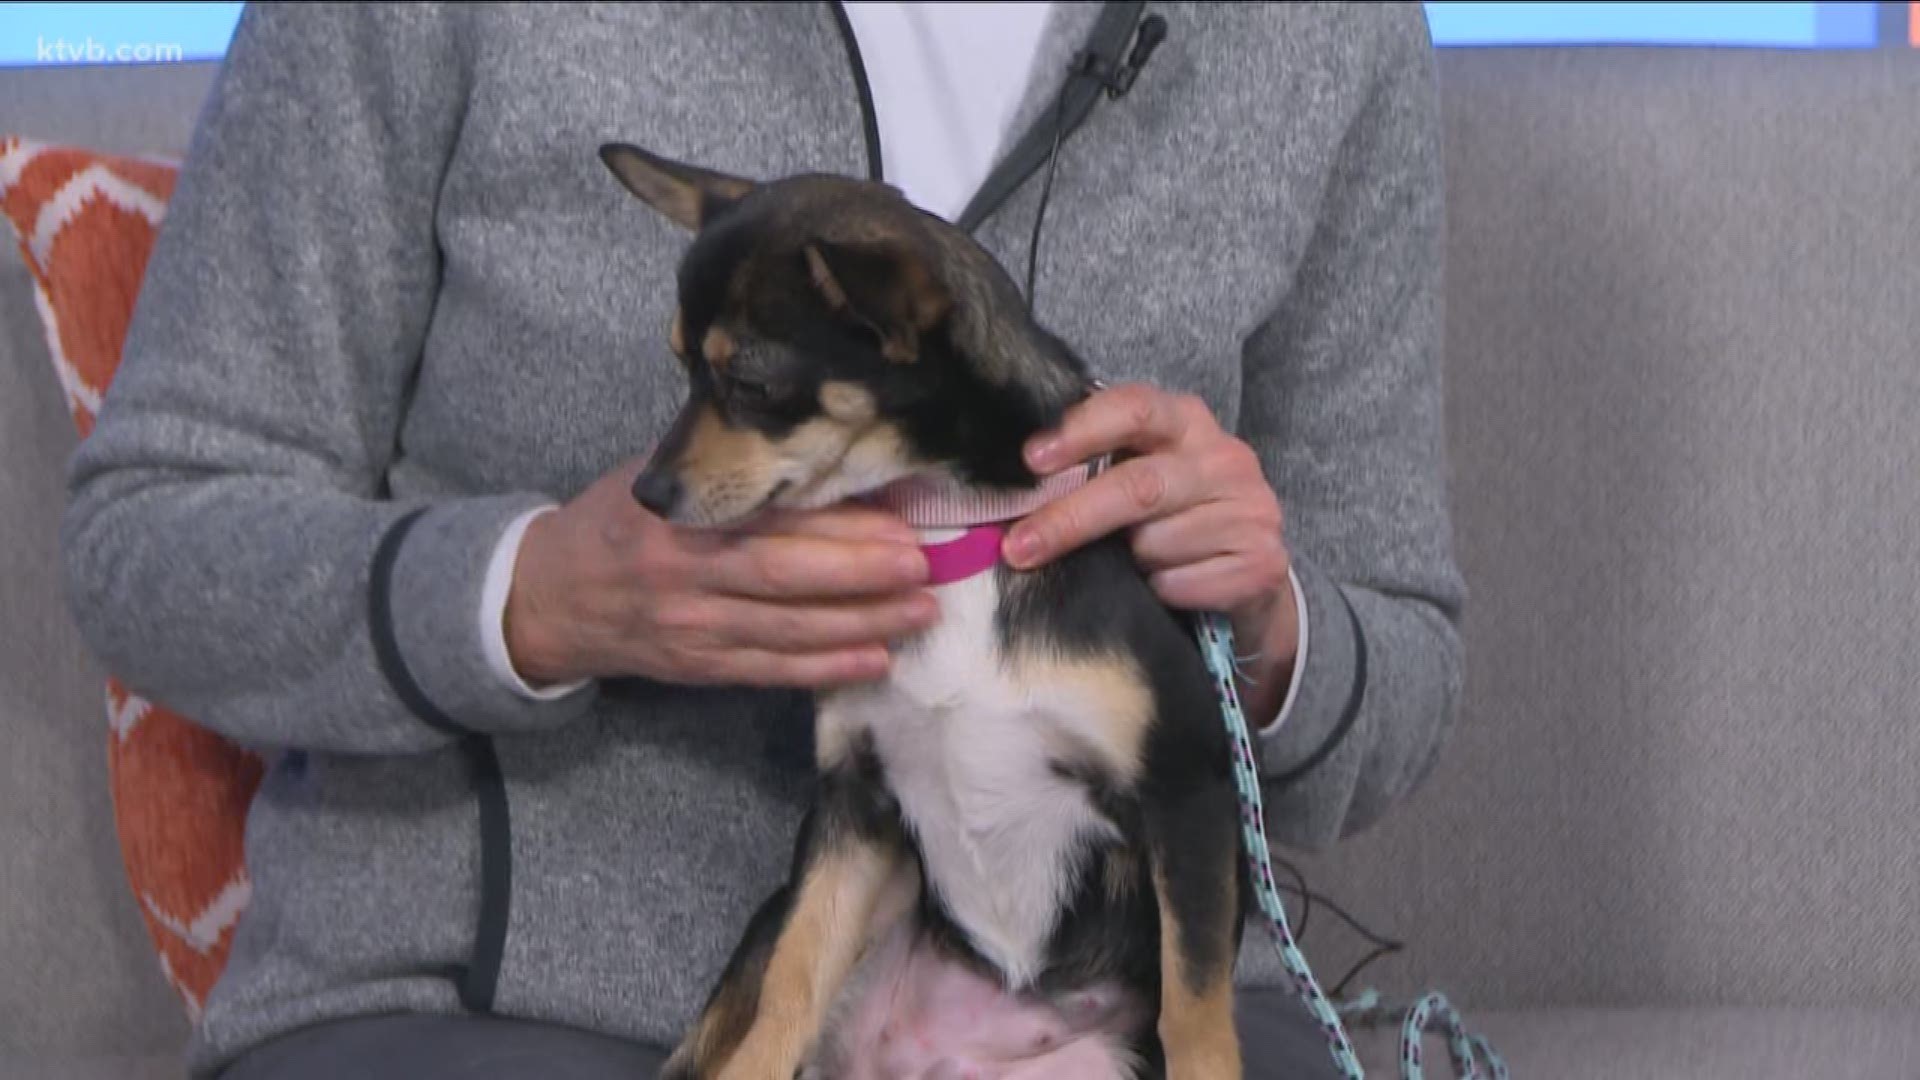 Olivia is a sweet Chihuahua-mix looking for a lap to curl up on.